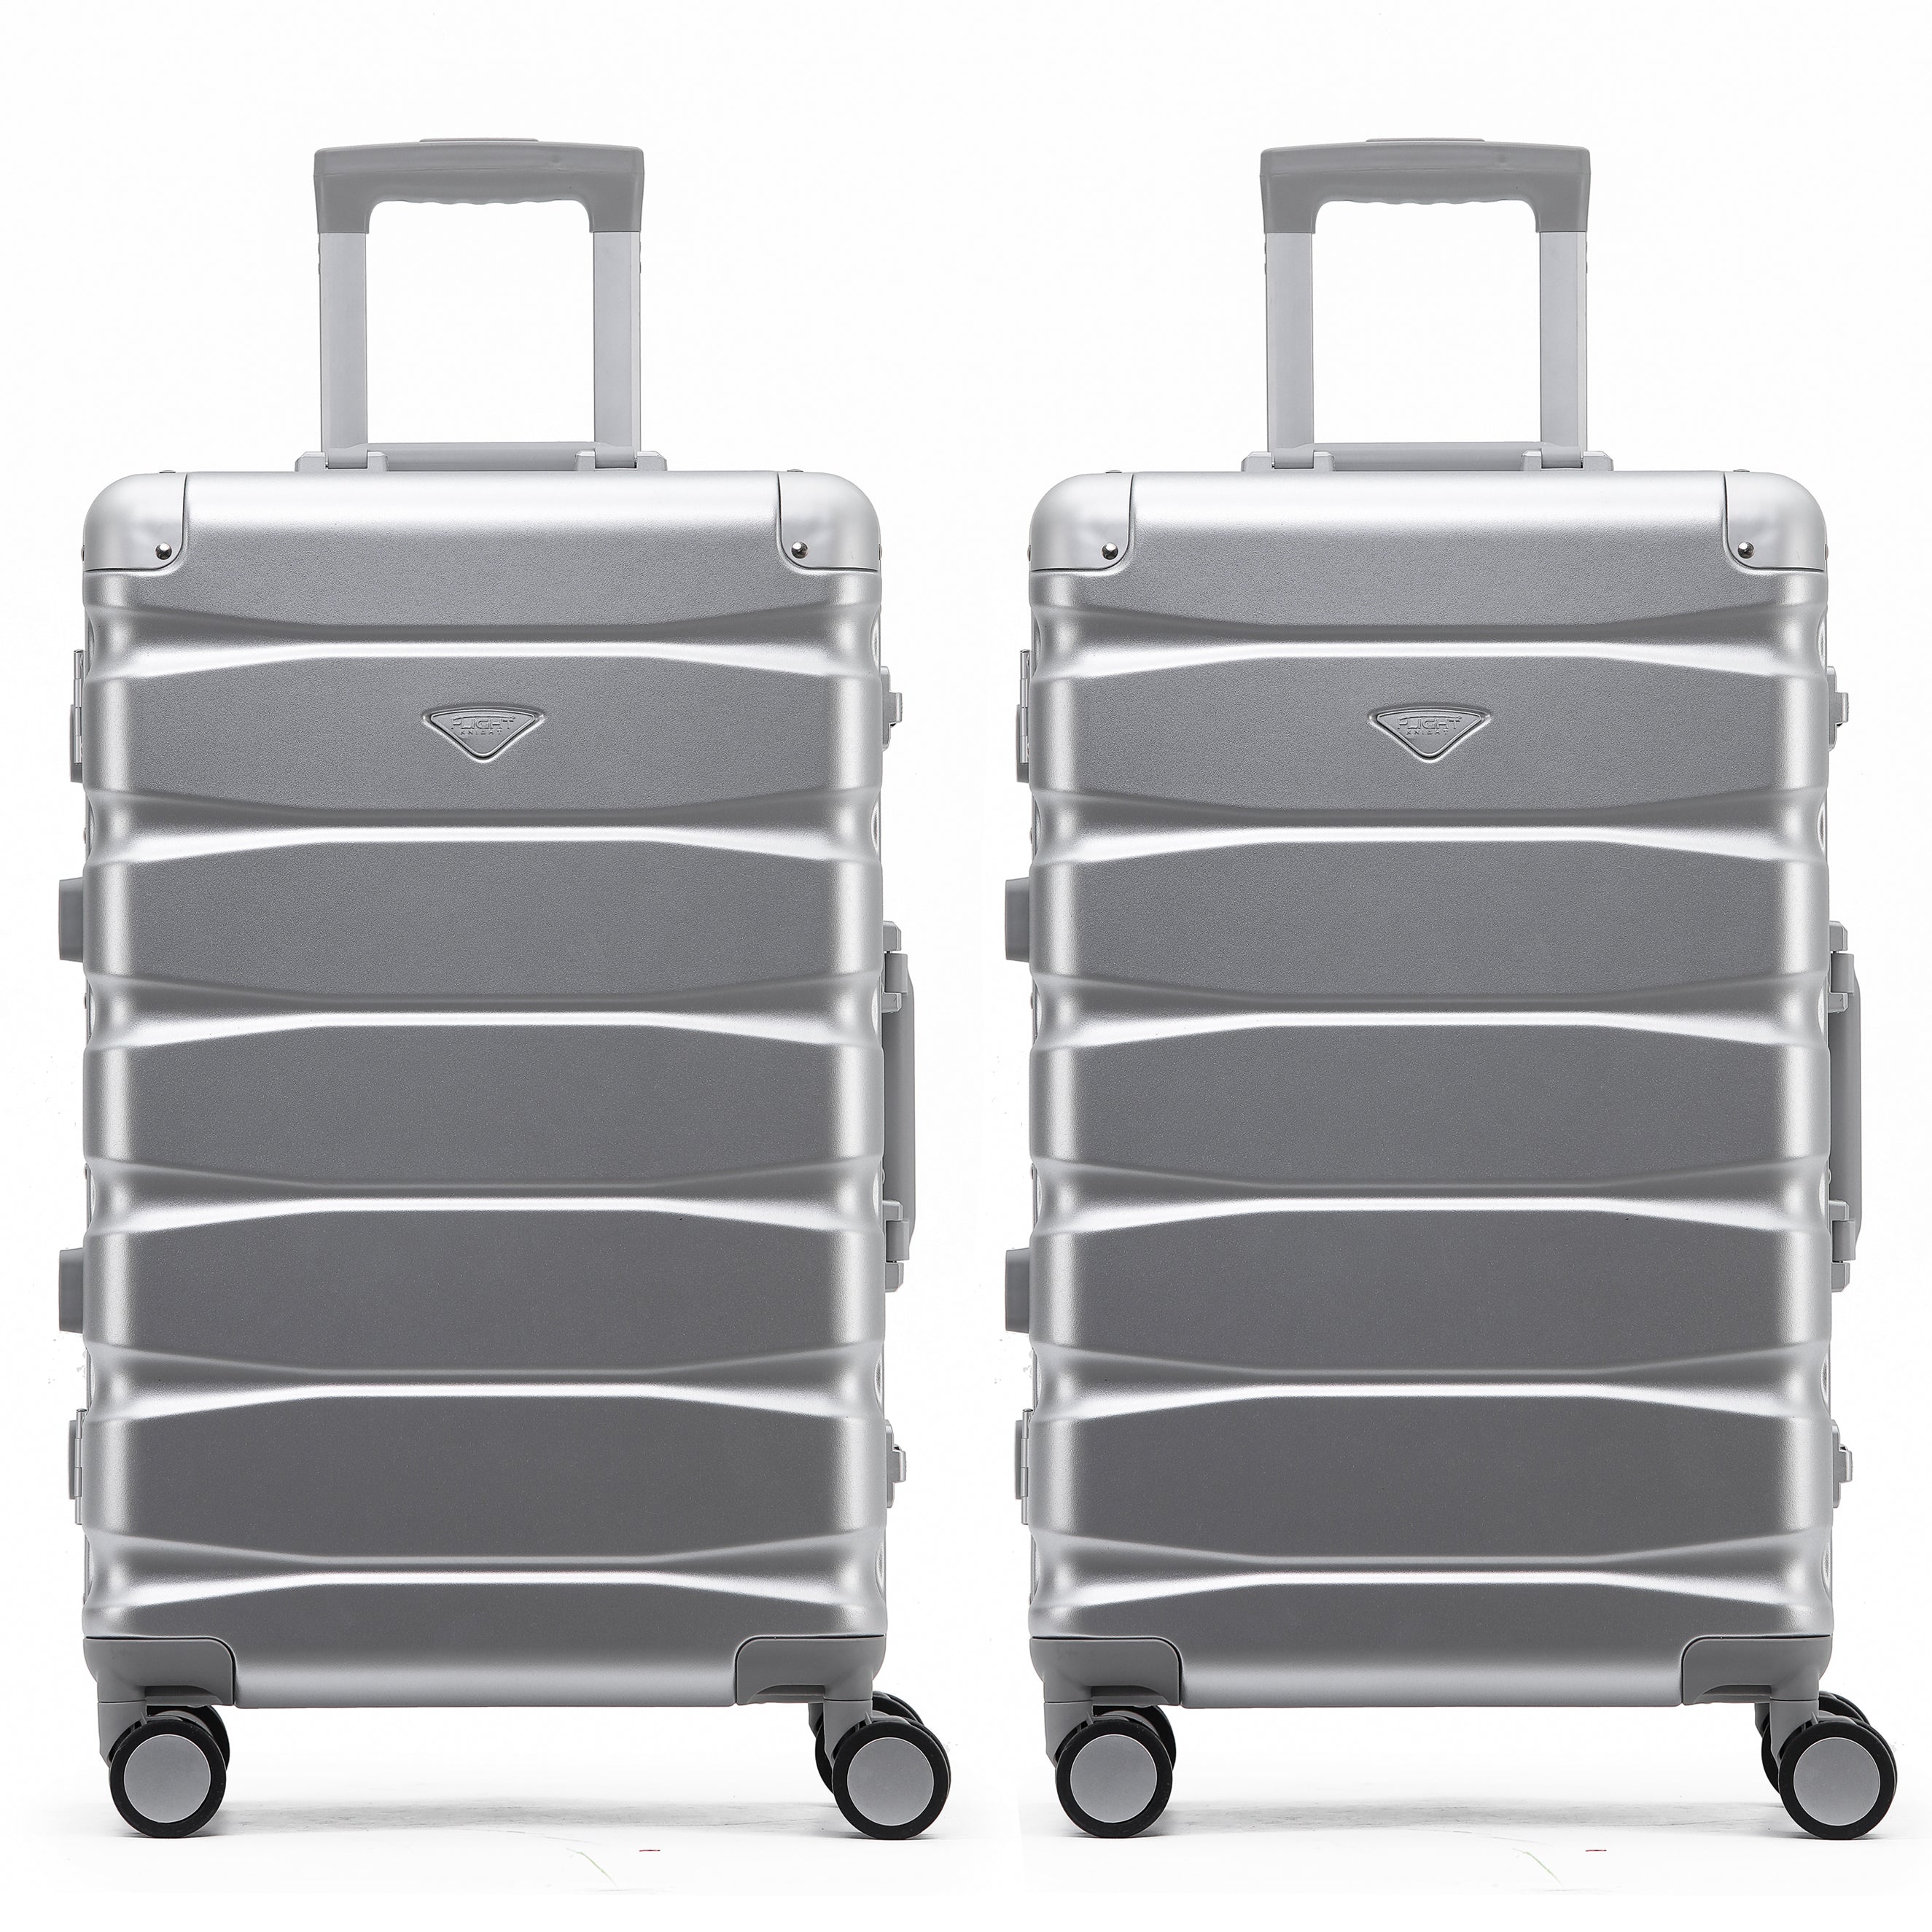 Flight Knight Premium Travel Suitcase - 8 Spinner Wheels - Built-in TSA Lock Lightweight Aluminium Frame, ABS Hard Shell Carry on Check in Luggage Highly Durable - Approved for Over 100 Airlines